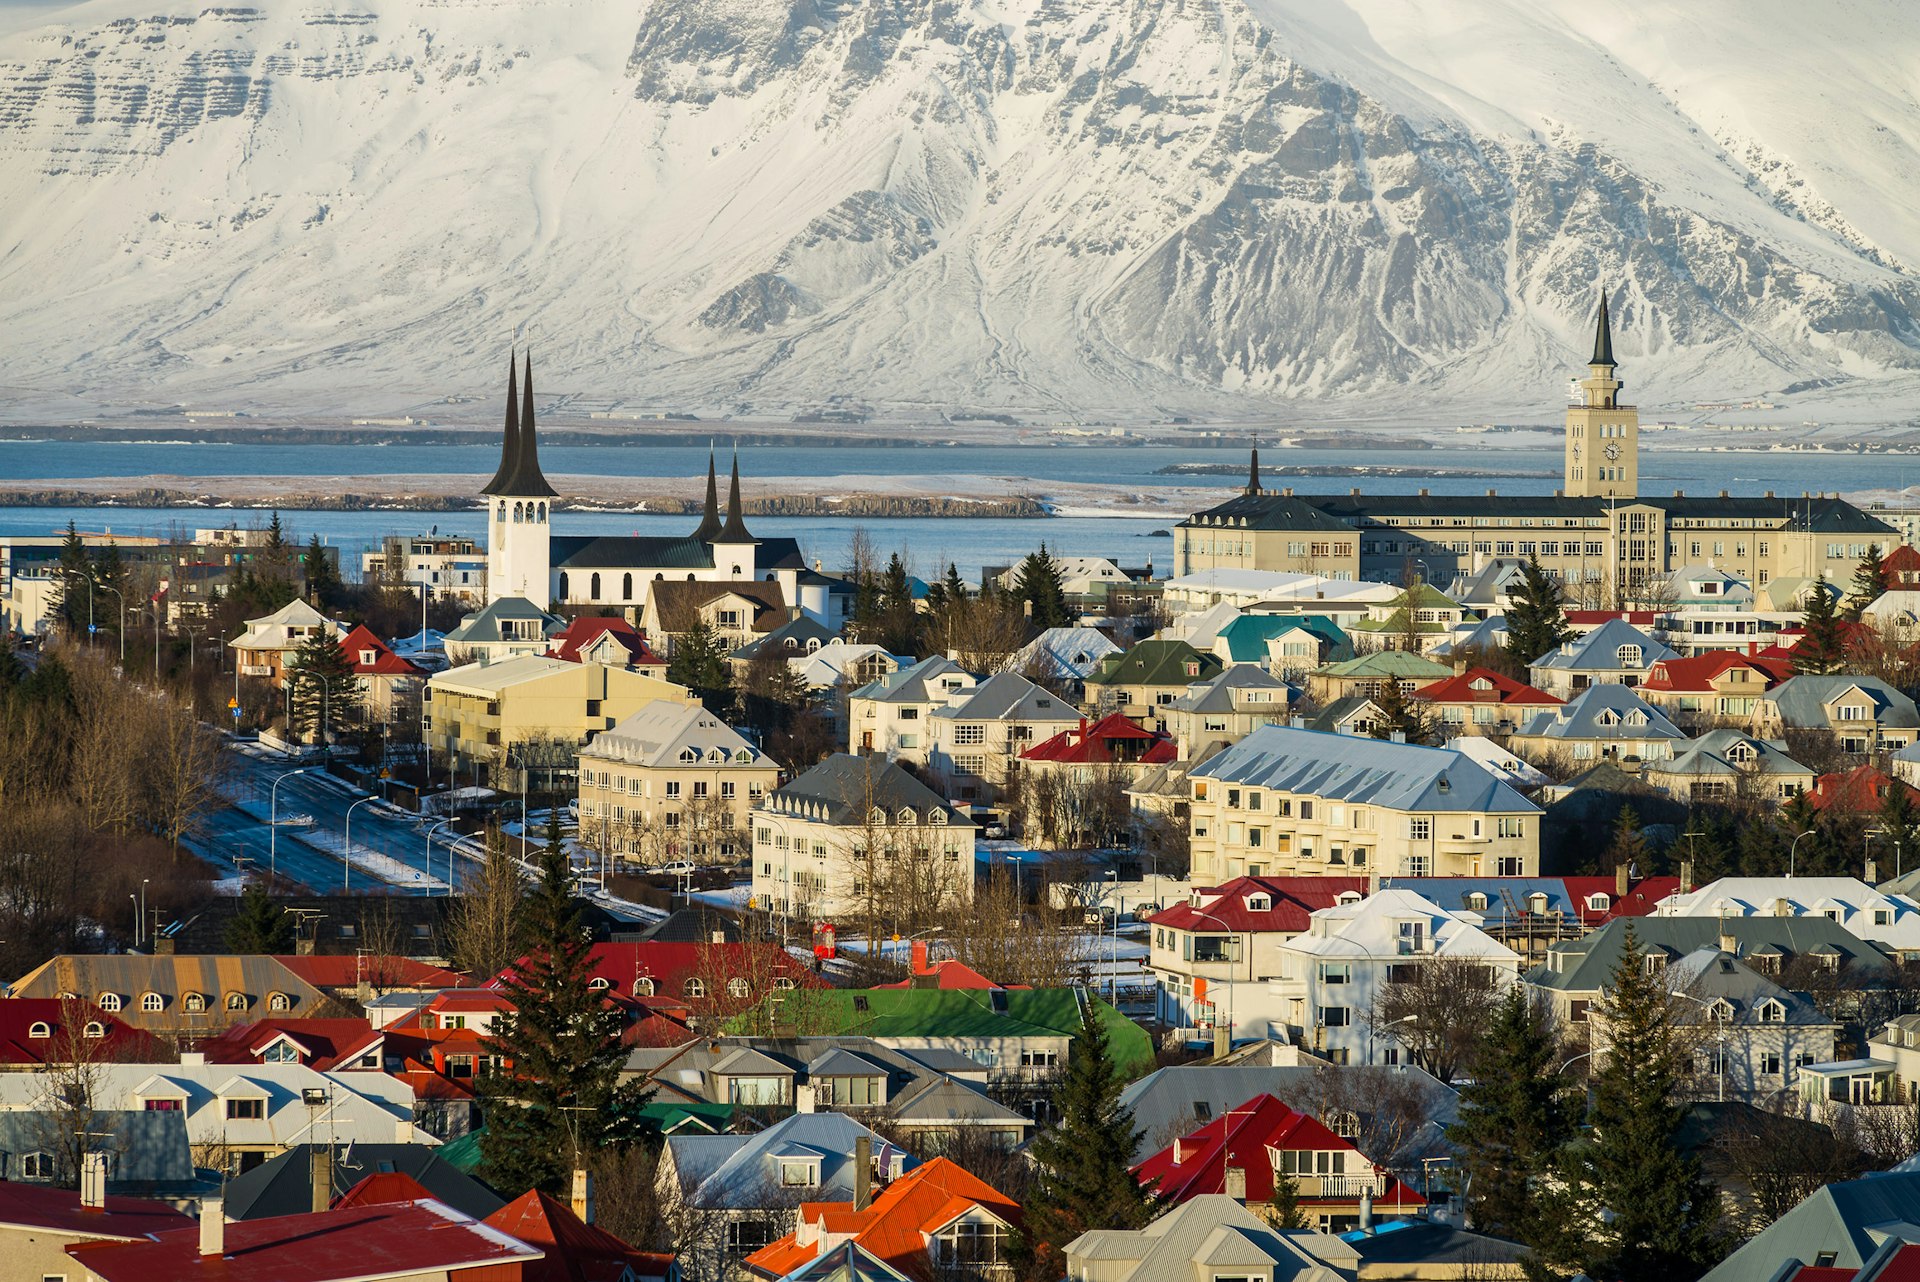 The skyline of Reykjavik with snowy hills behind